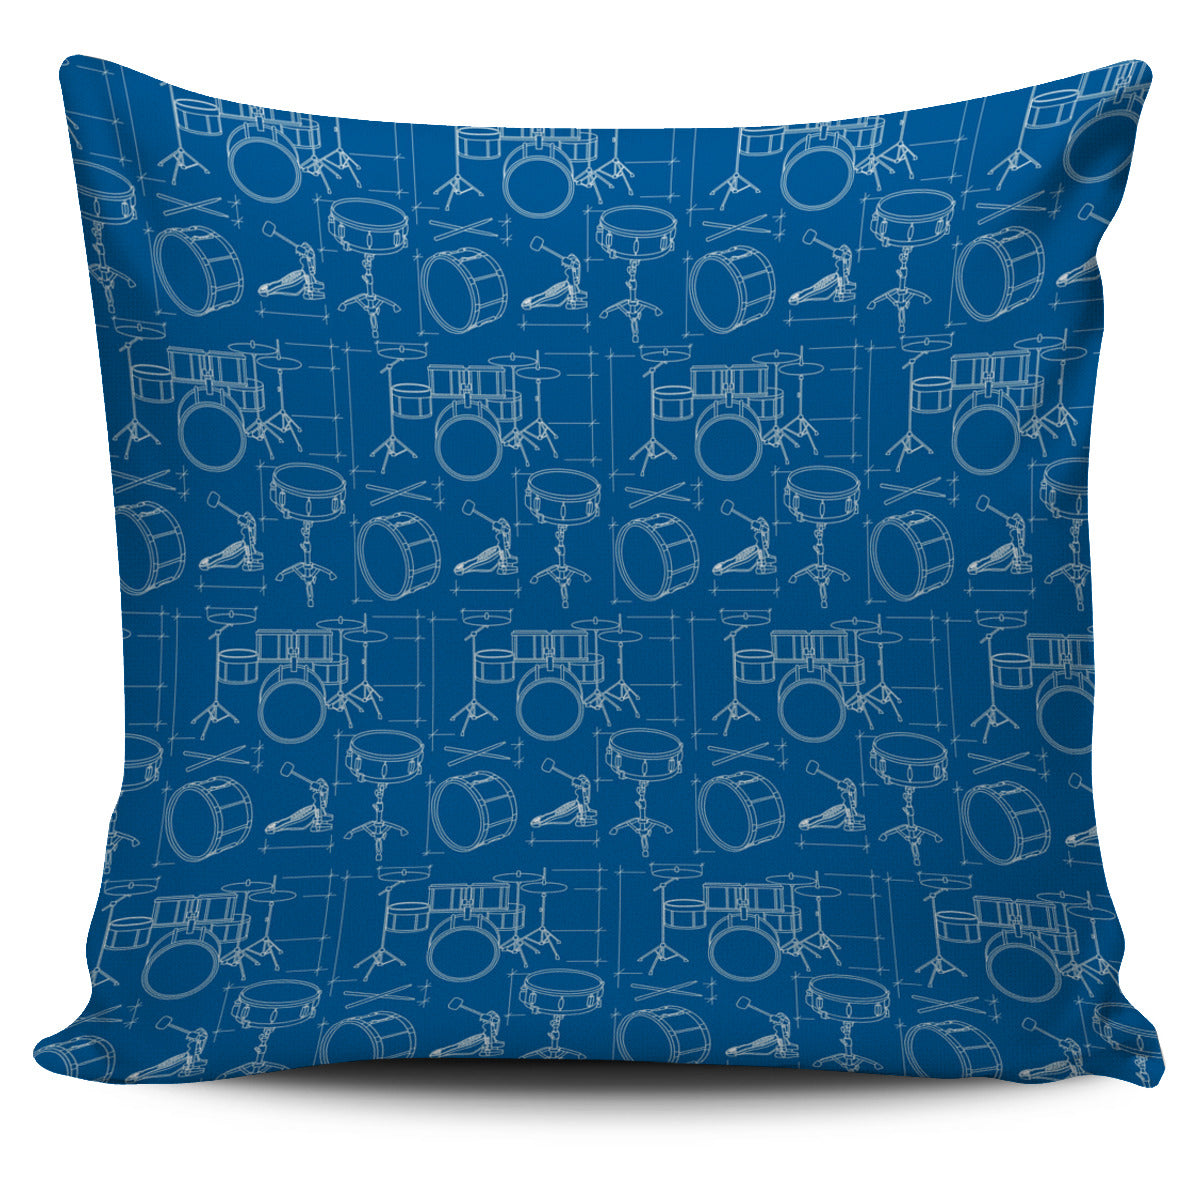 Technical Drums Blue Pillow Cover